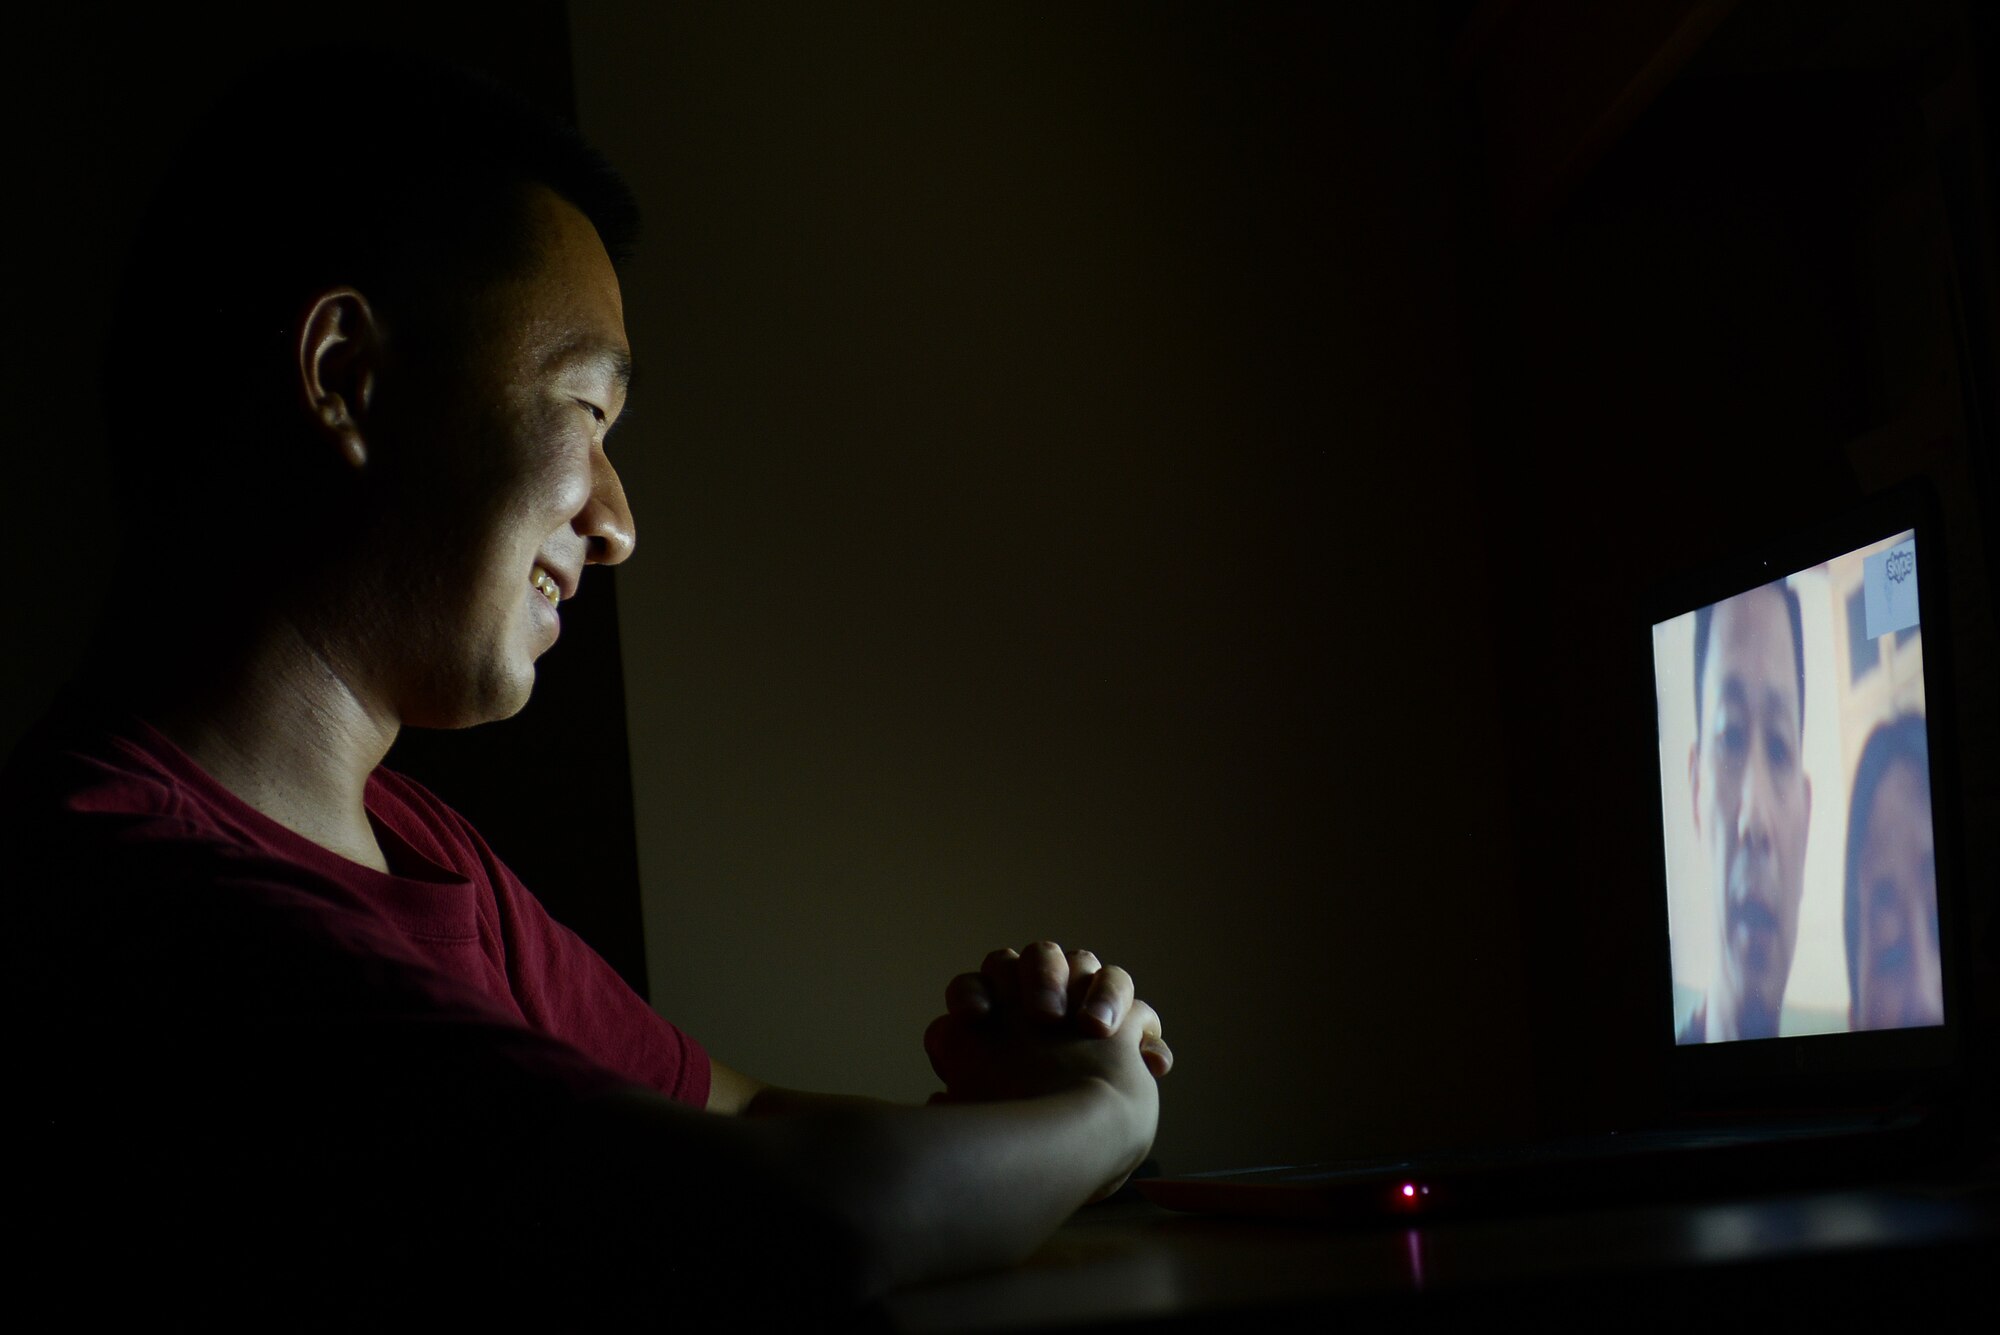 U.S. Air Force Airman 1st Class Bin Ma, 20th Comptroller Squadron financial services technician, speaks with his parents through a video chat in his dorm room at Shaw Air Force Base, S.C., Aug. 2, 2015. Ma is hoping to soon visit his parents in China who he hasn’t seen in seven years and is anticipating bringing them to America as U.S. citizens in a few years. (U.S. Air Force photo by Senior Airman Diana M. Cossaboom/Released)